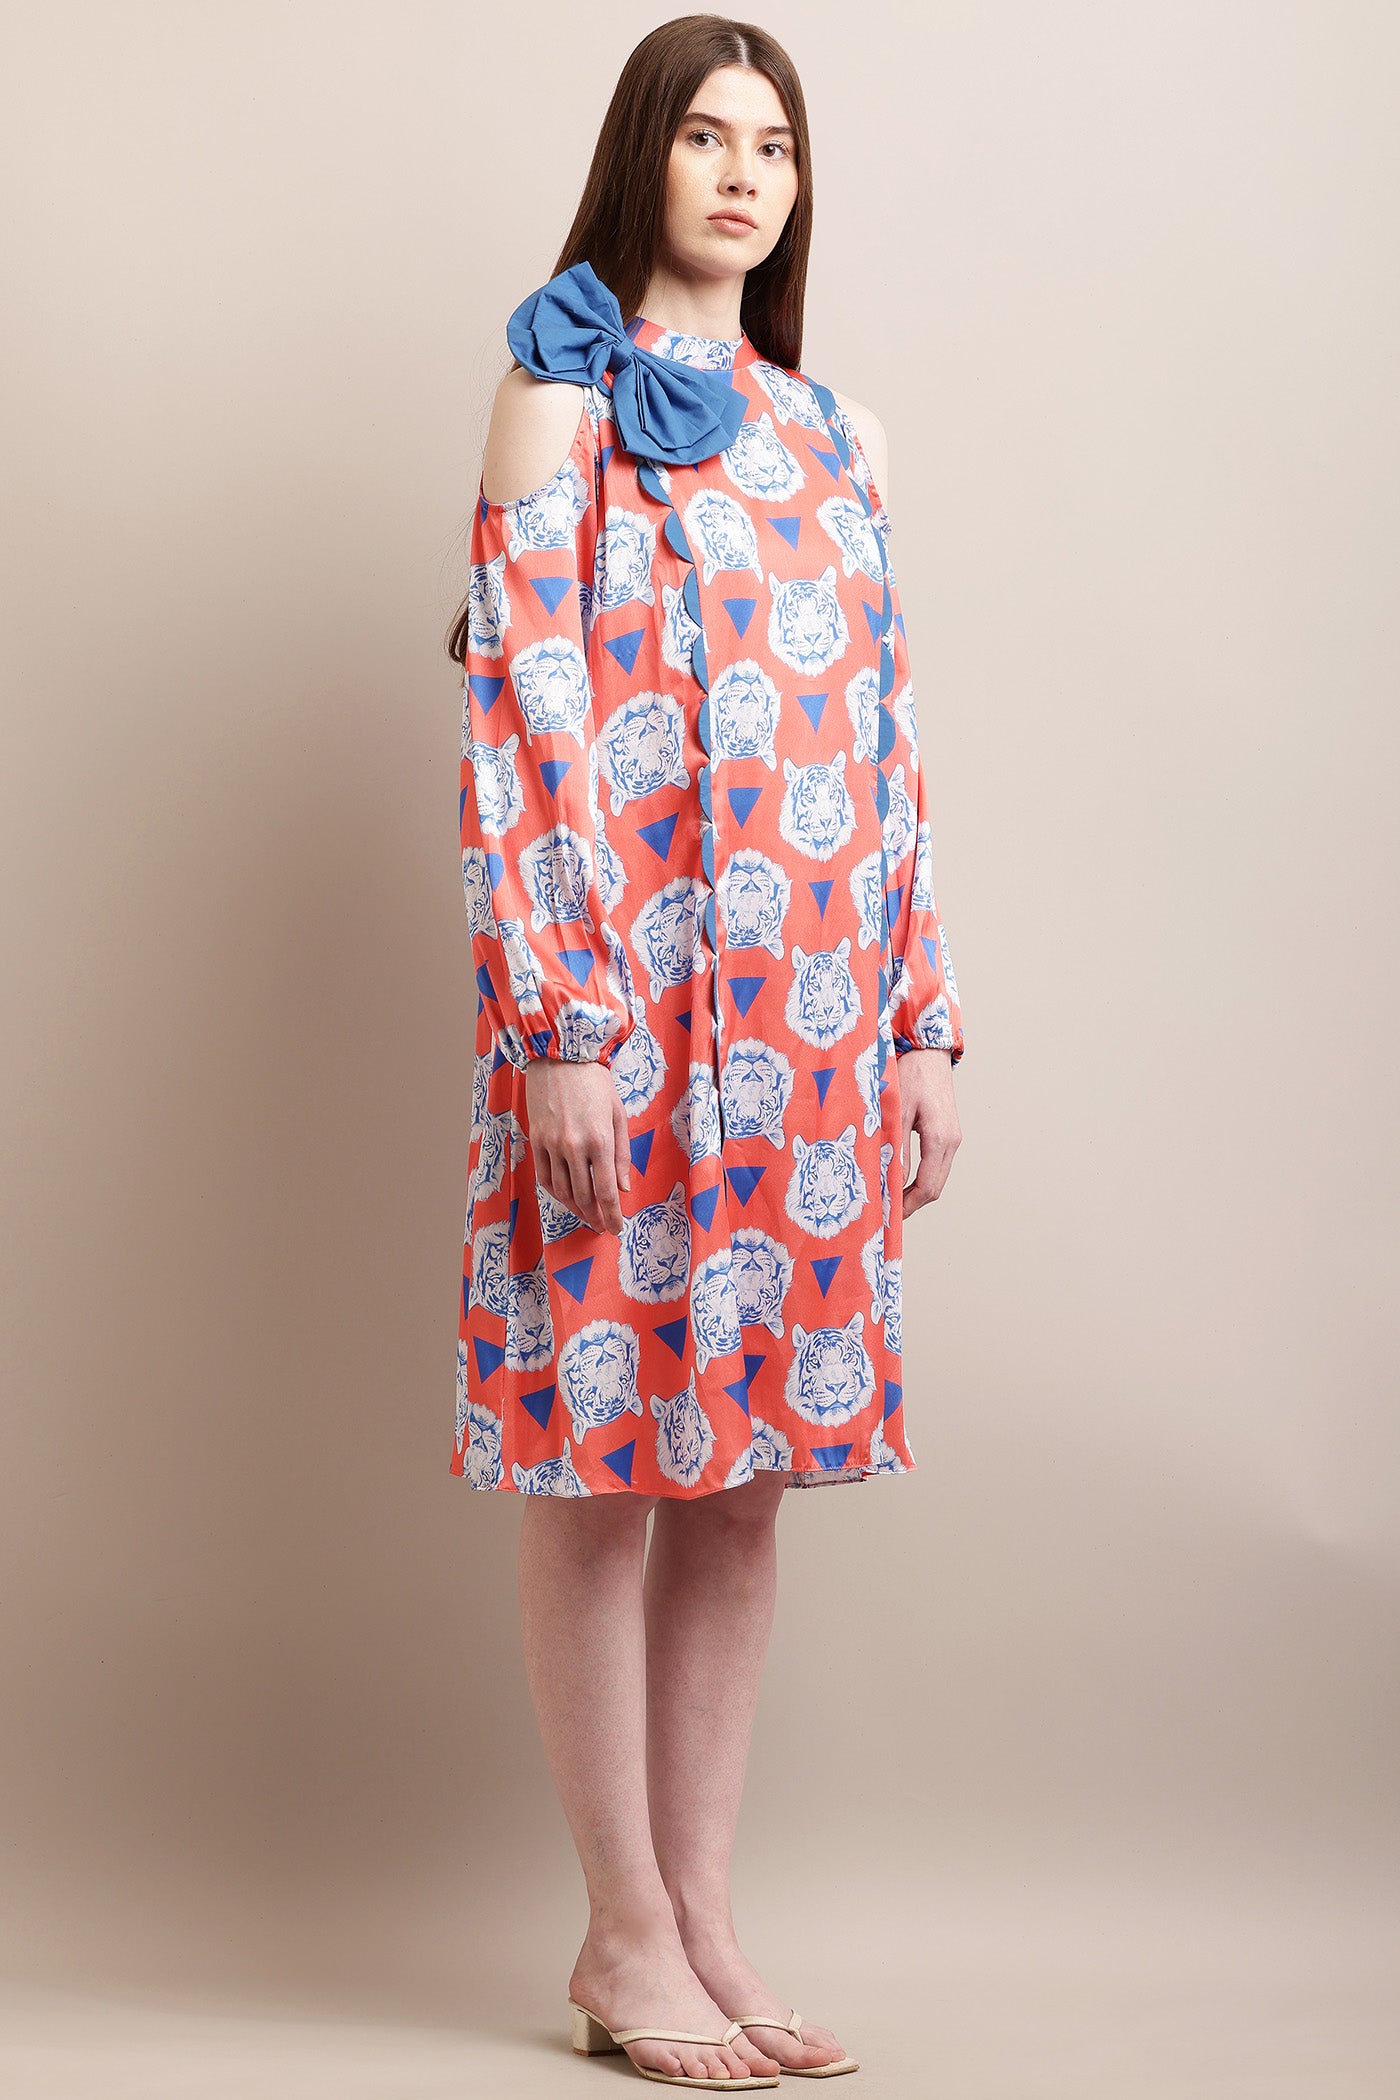 Red & Blue Print Bow & Scallop Dress